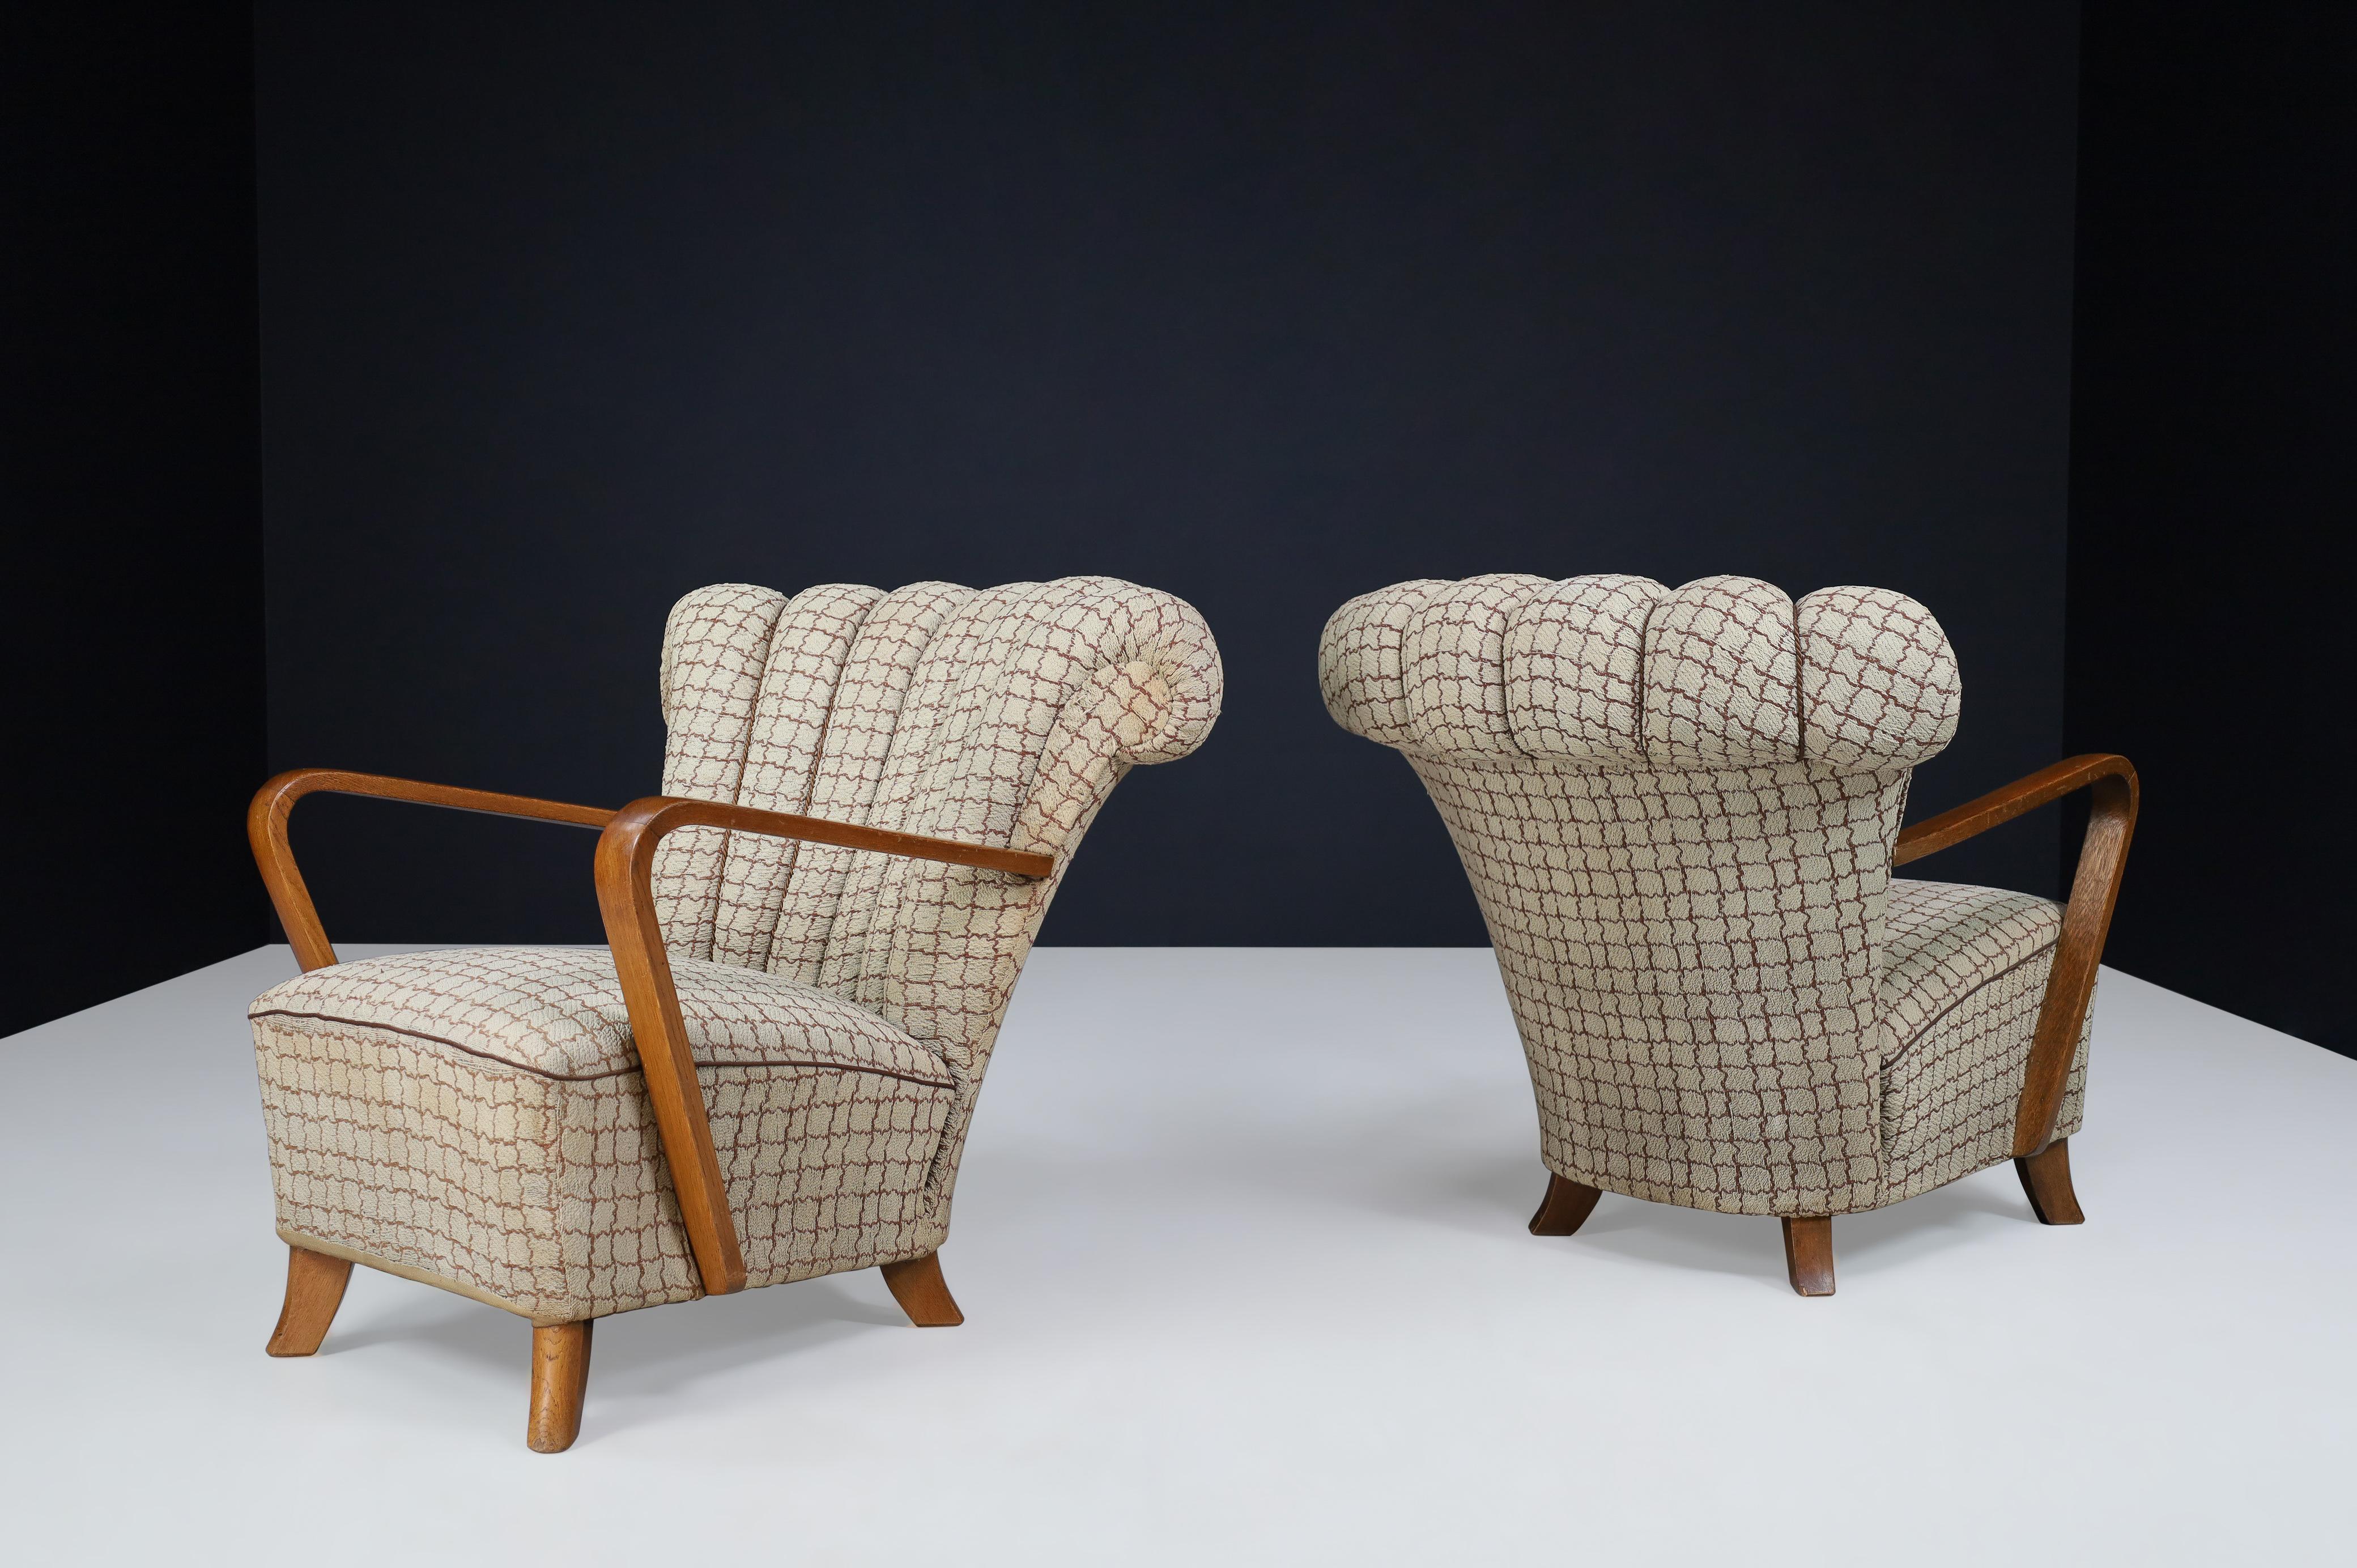 Art Deco Fan-Shaped Armchairs in Bentwood and Original Upholstery, Praque, 1930s For Sale 2